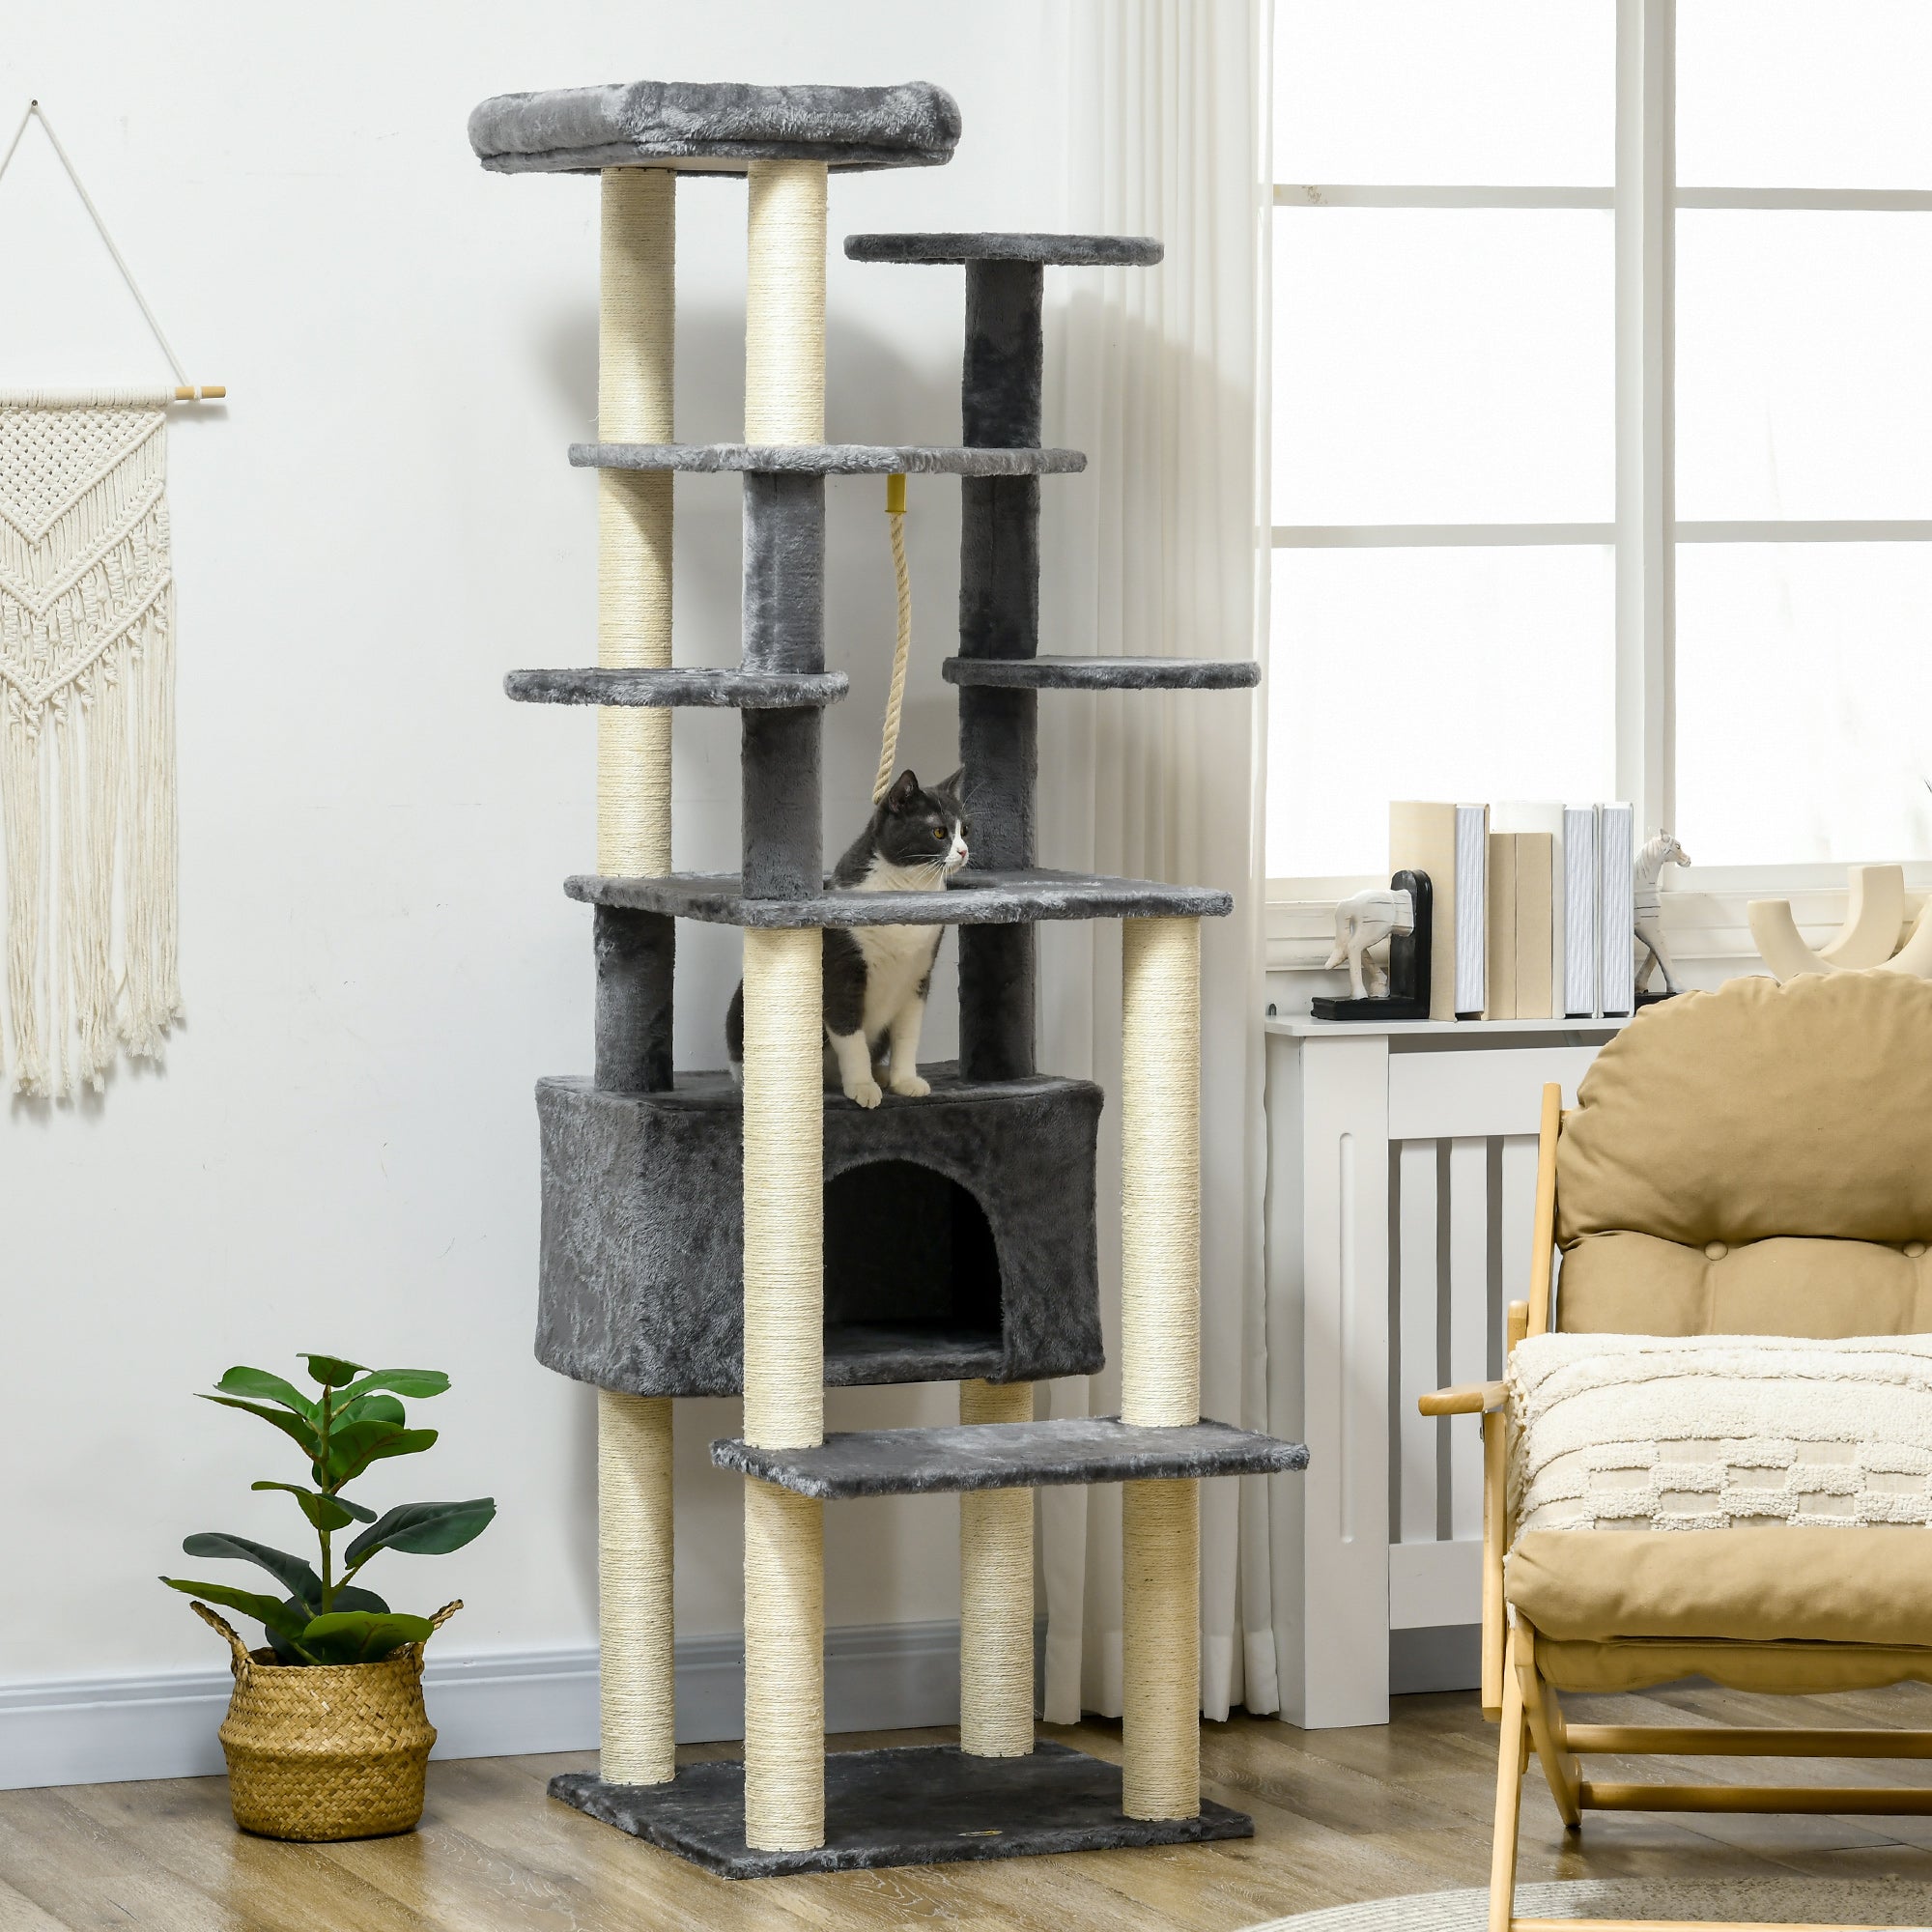 184cm Cat Tree for Indoor Cats, Multi-level Kitten Climbing Tower with Scratching Posts, Cat Bed, Condo, Perches, Hanging Play Rope, Grey-1